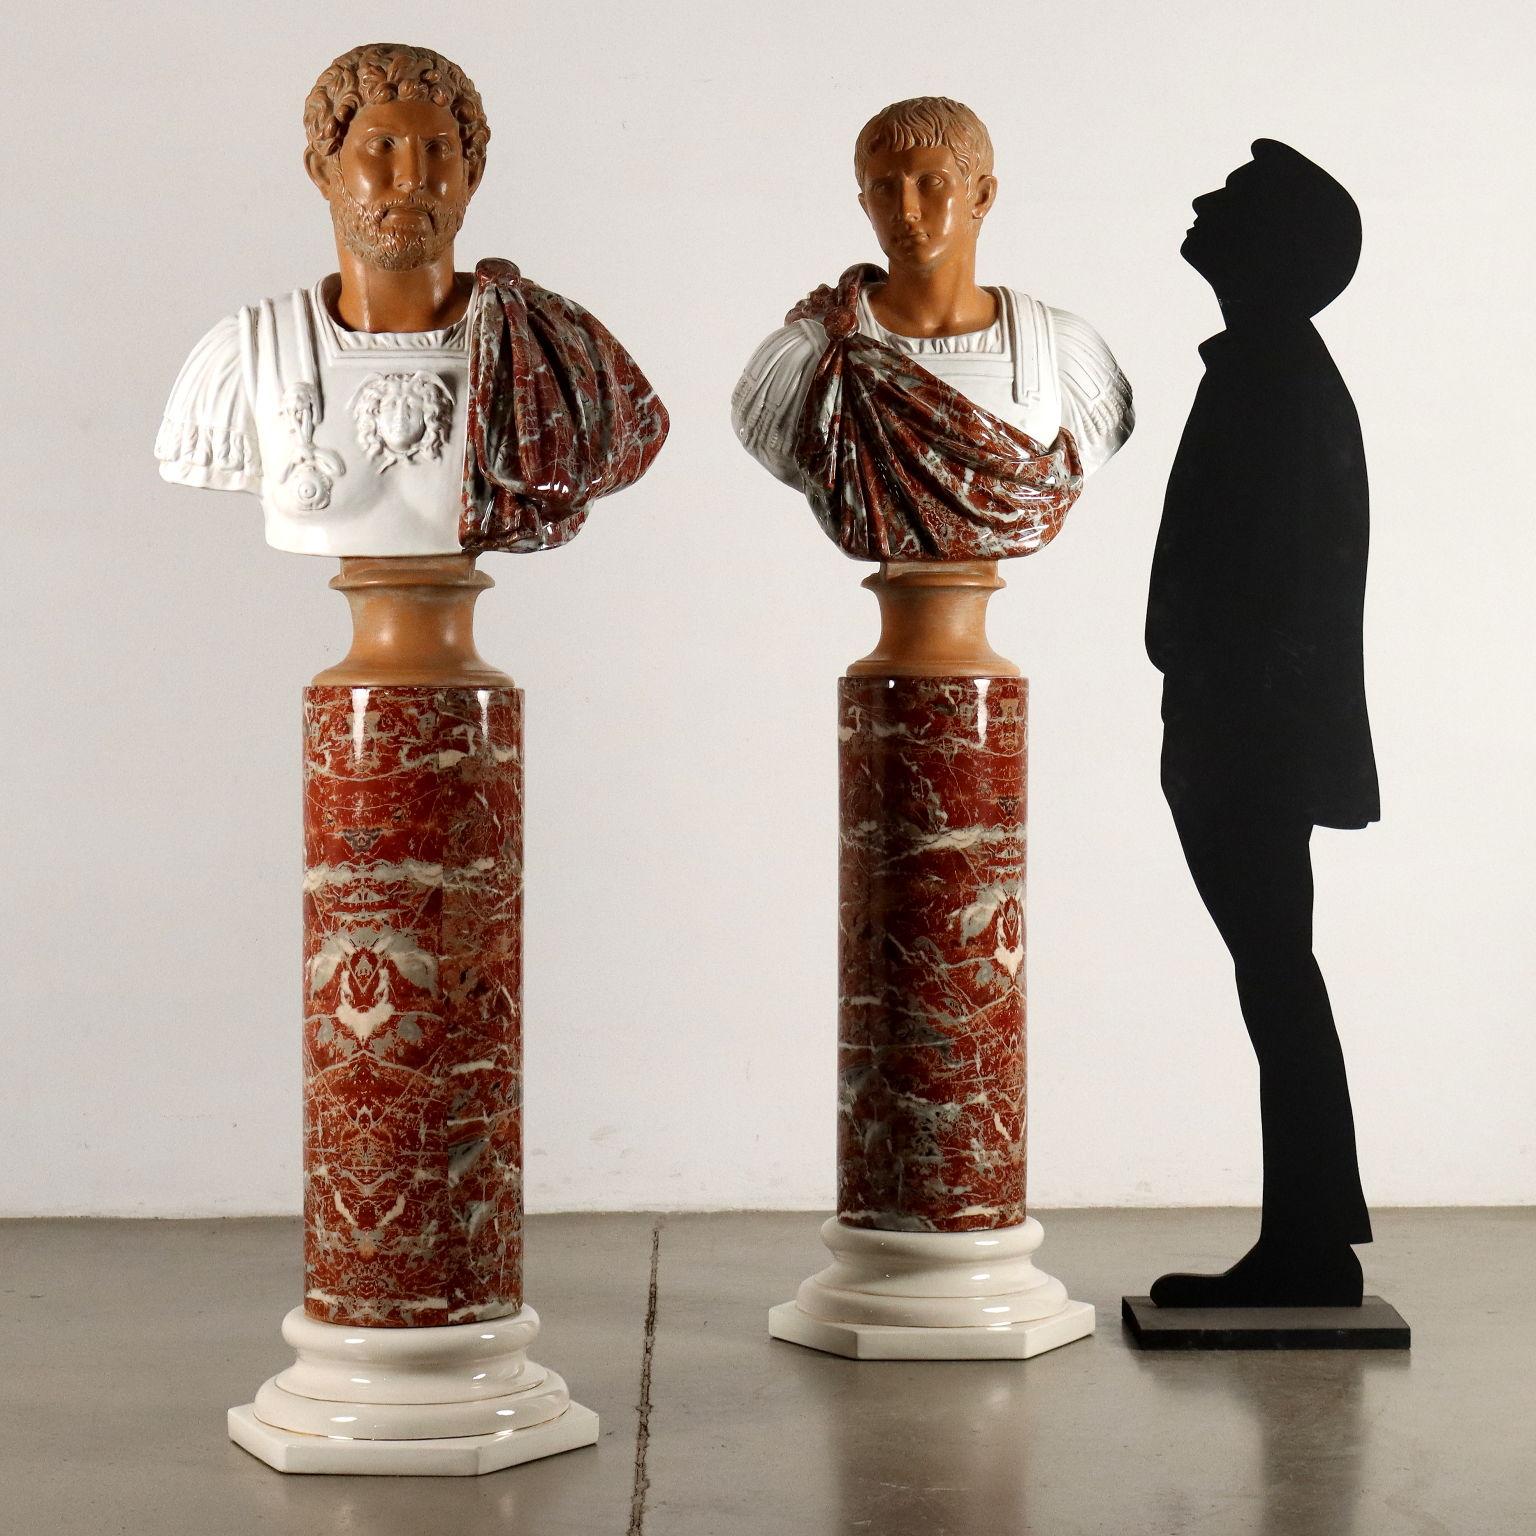 Pair of ceramic busts of Roman Emperors resting on ceramic columns, production Tommaso Barbi 1970s. Columns with hexagonal base of white glazed ceramic ornamented with gold piping, shaft imitating a red breccia marble; busts depicting Emperors